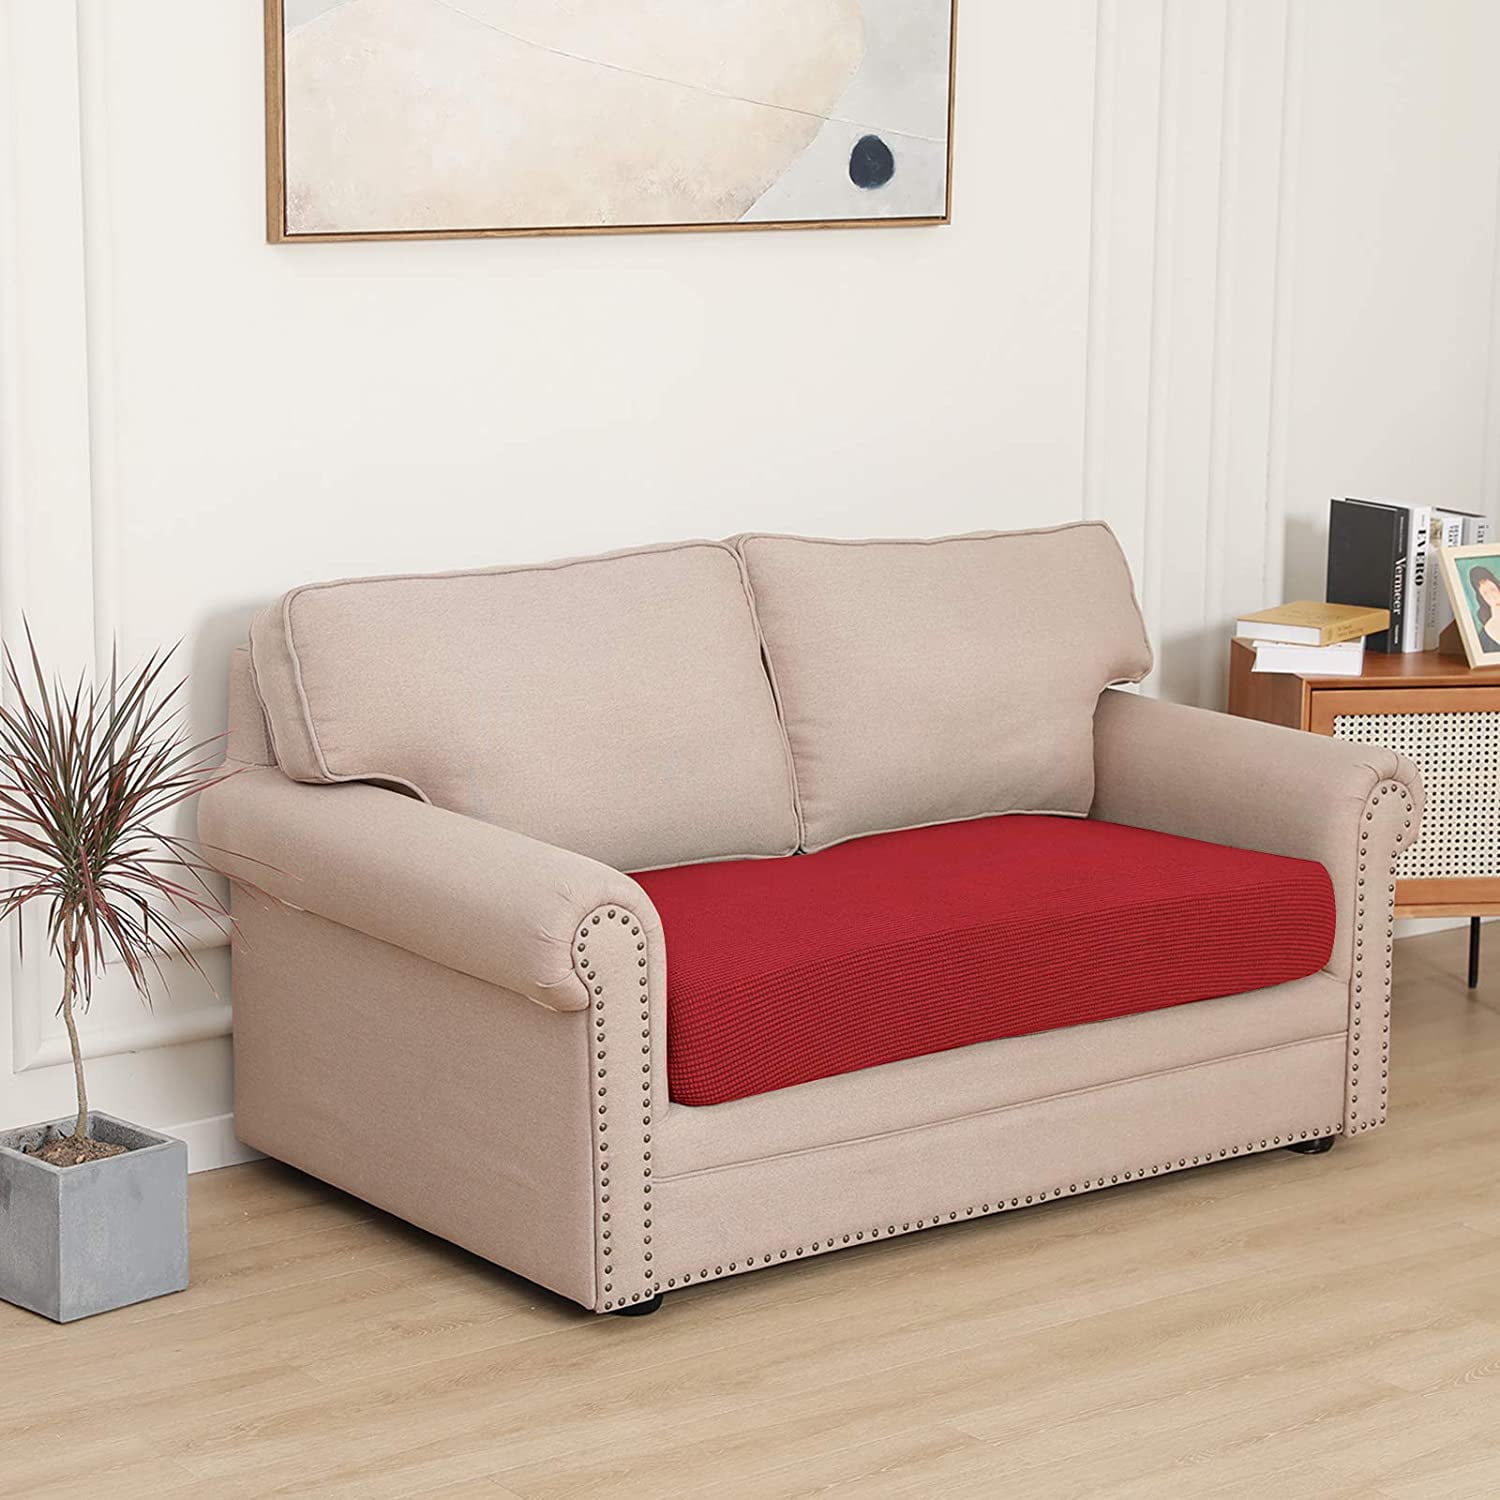 loveseat Cushion,Chocolate Easy-Going Stretch Cushion Cover Sofa Cushion Furniture Protector Sofa Seat Sofa slipcover Sofa Cover Soft Flexibility with Elastic Bottom